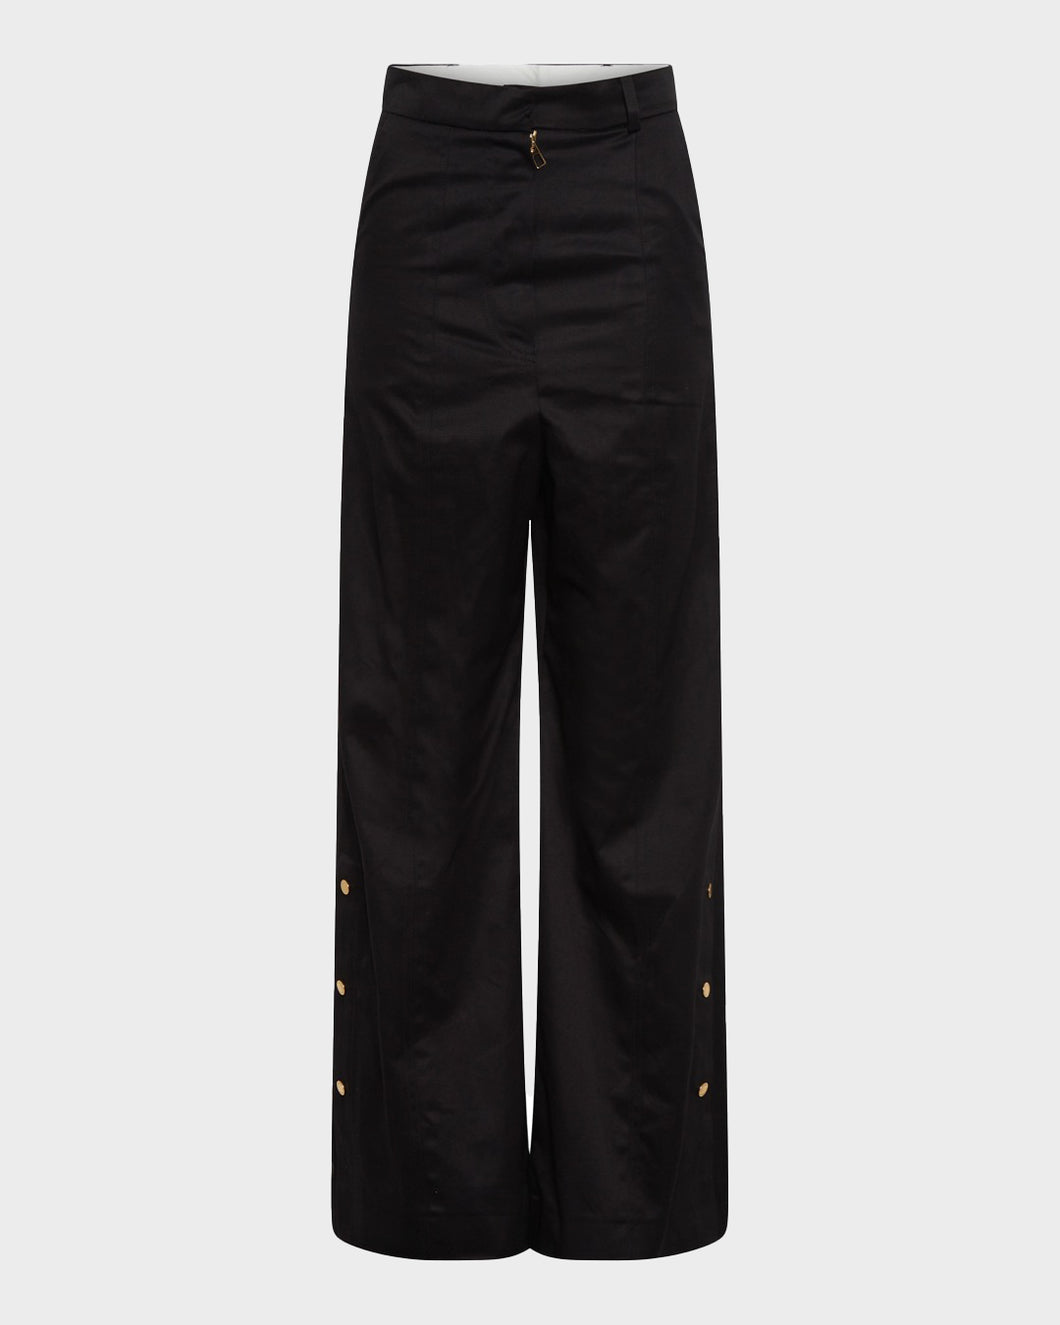 FLUTED CROPPED PANTS - BLACK